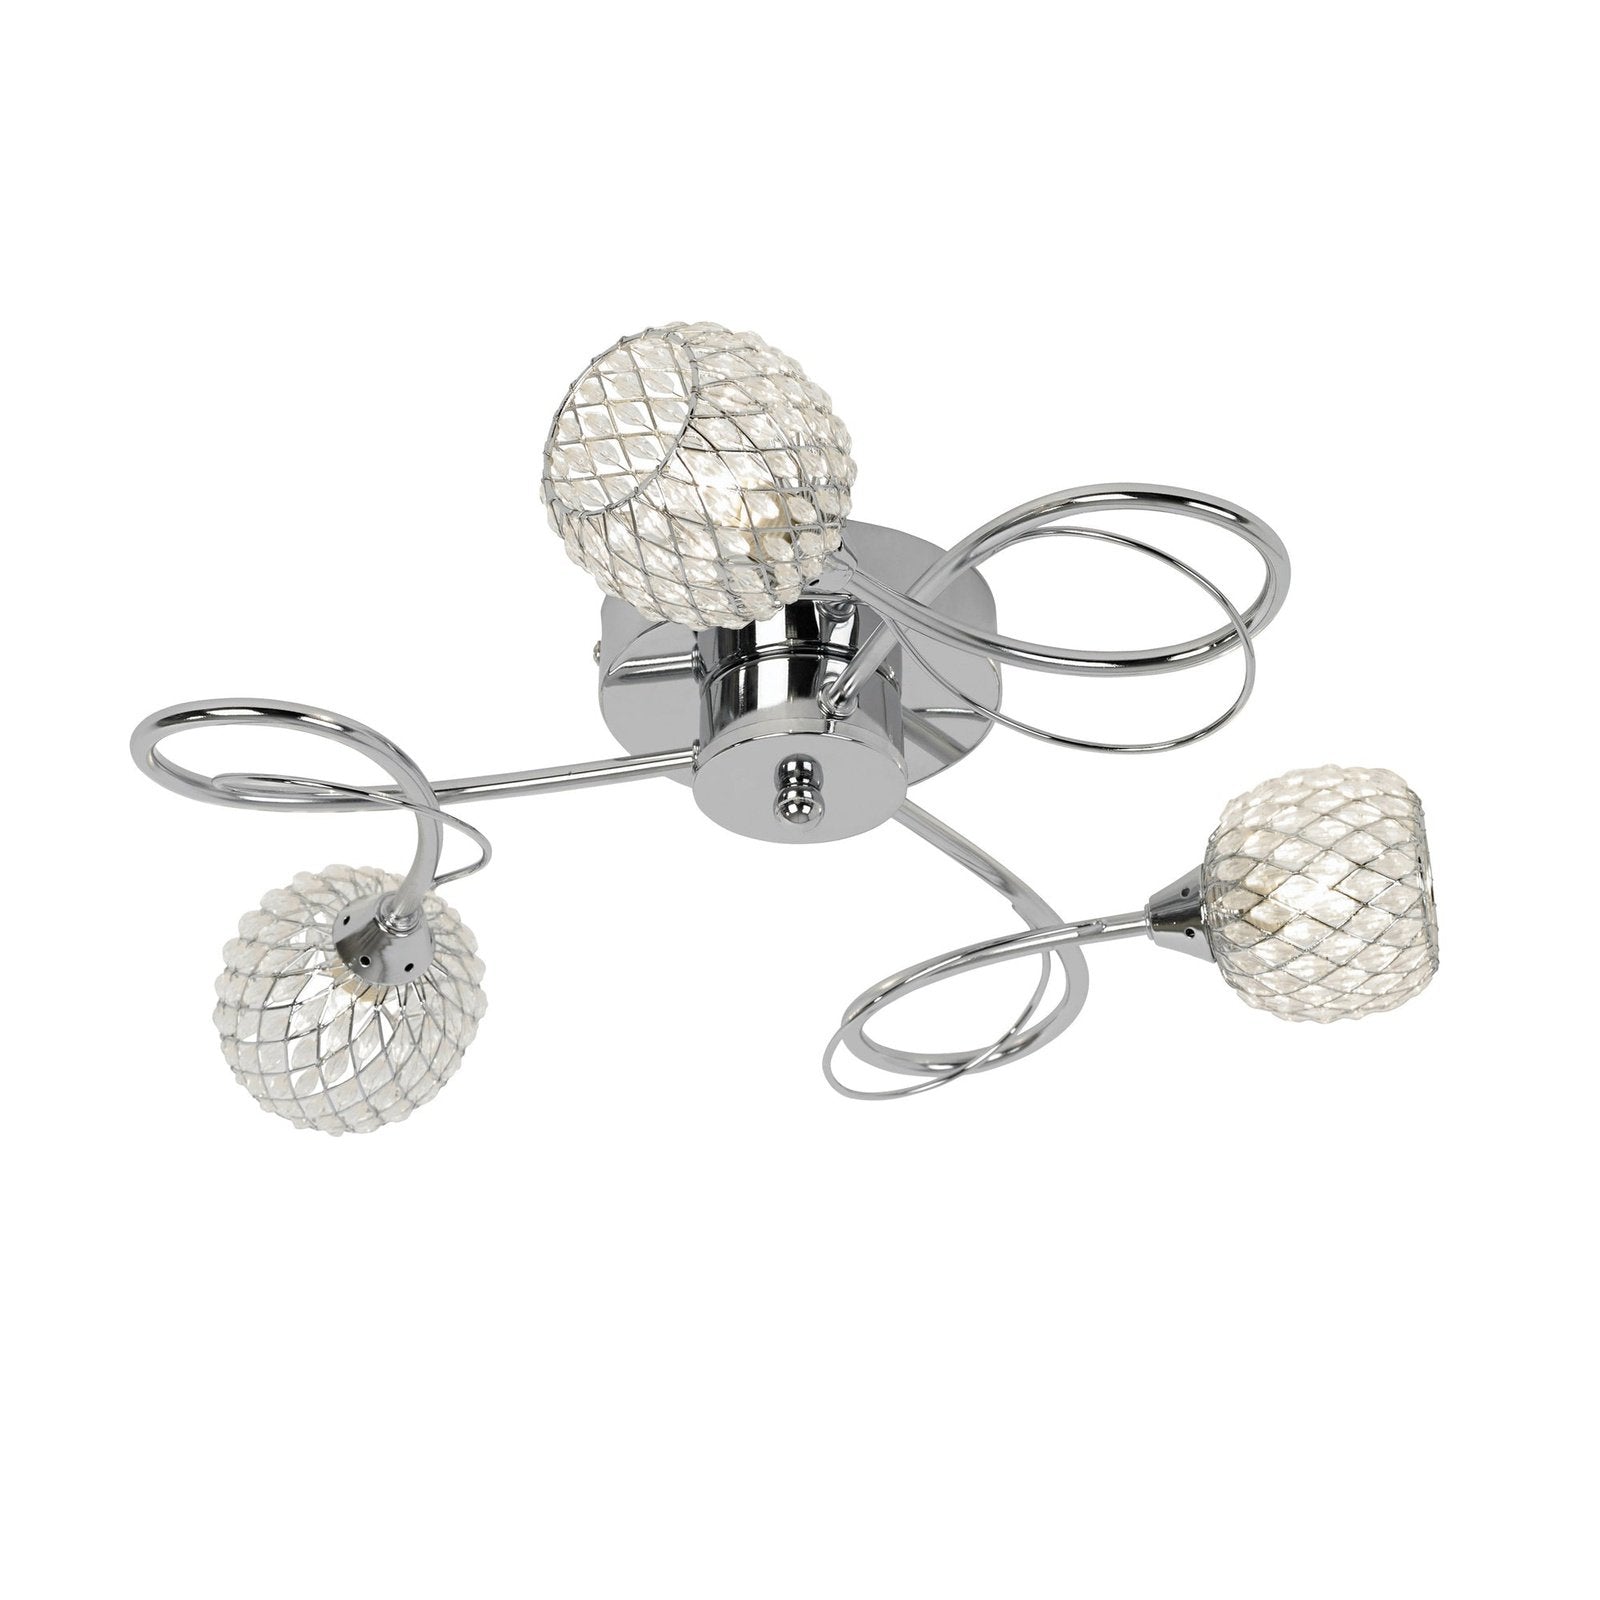 Fiora Ceiling Lamp - Flush Ceiling Fitting- Mesh and Clear Bead Shades - Dimmable